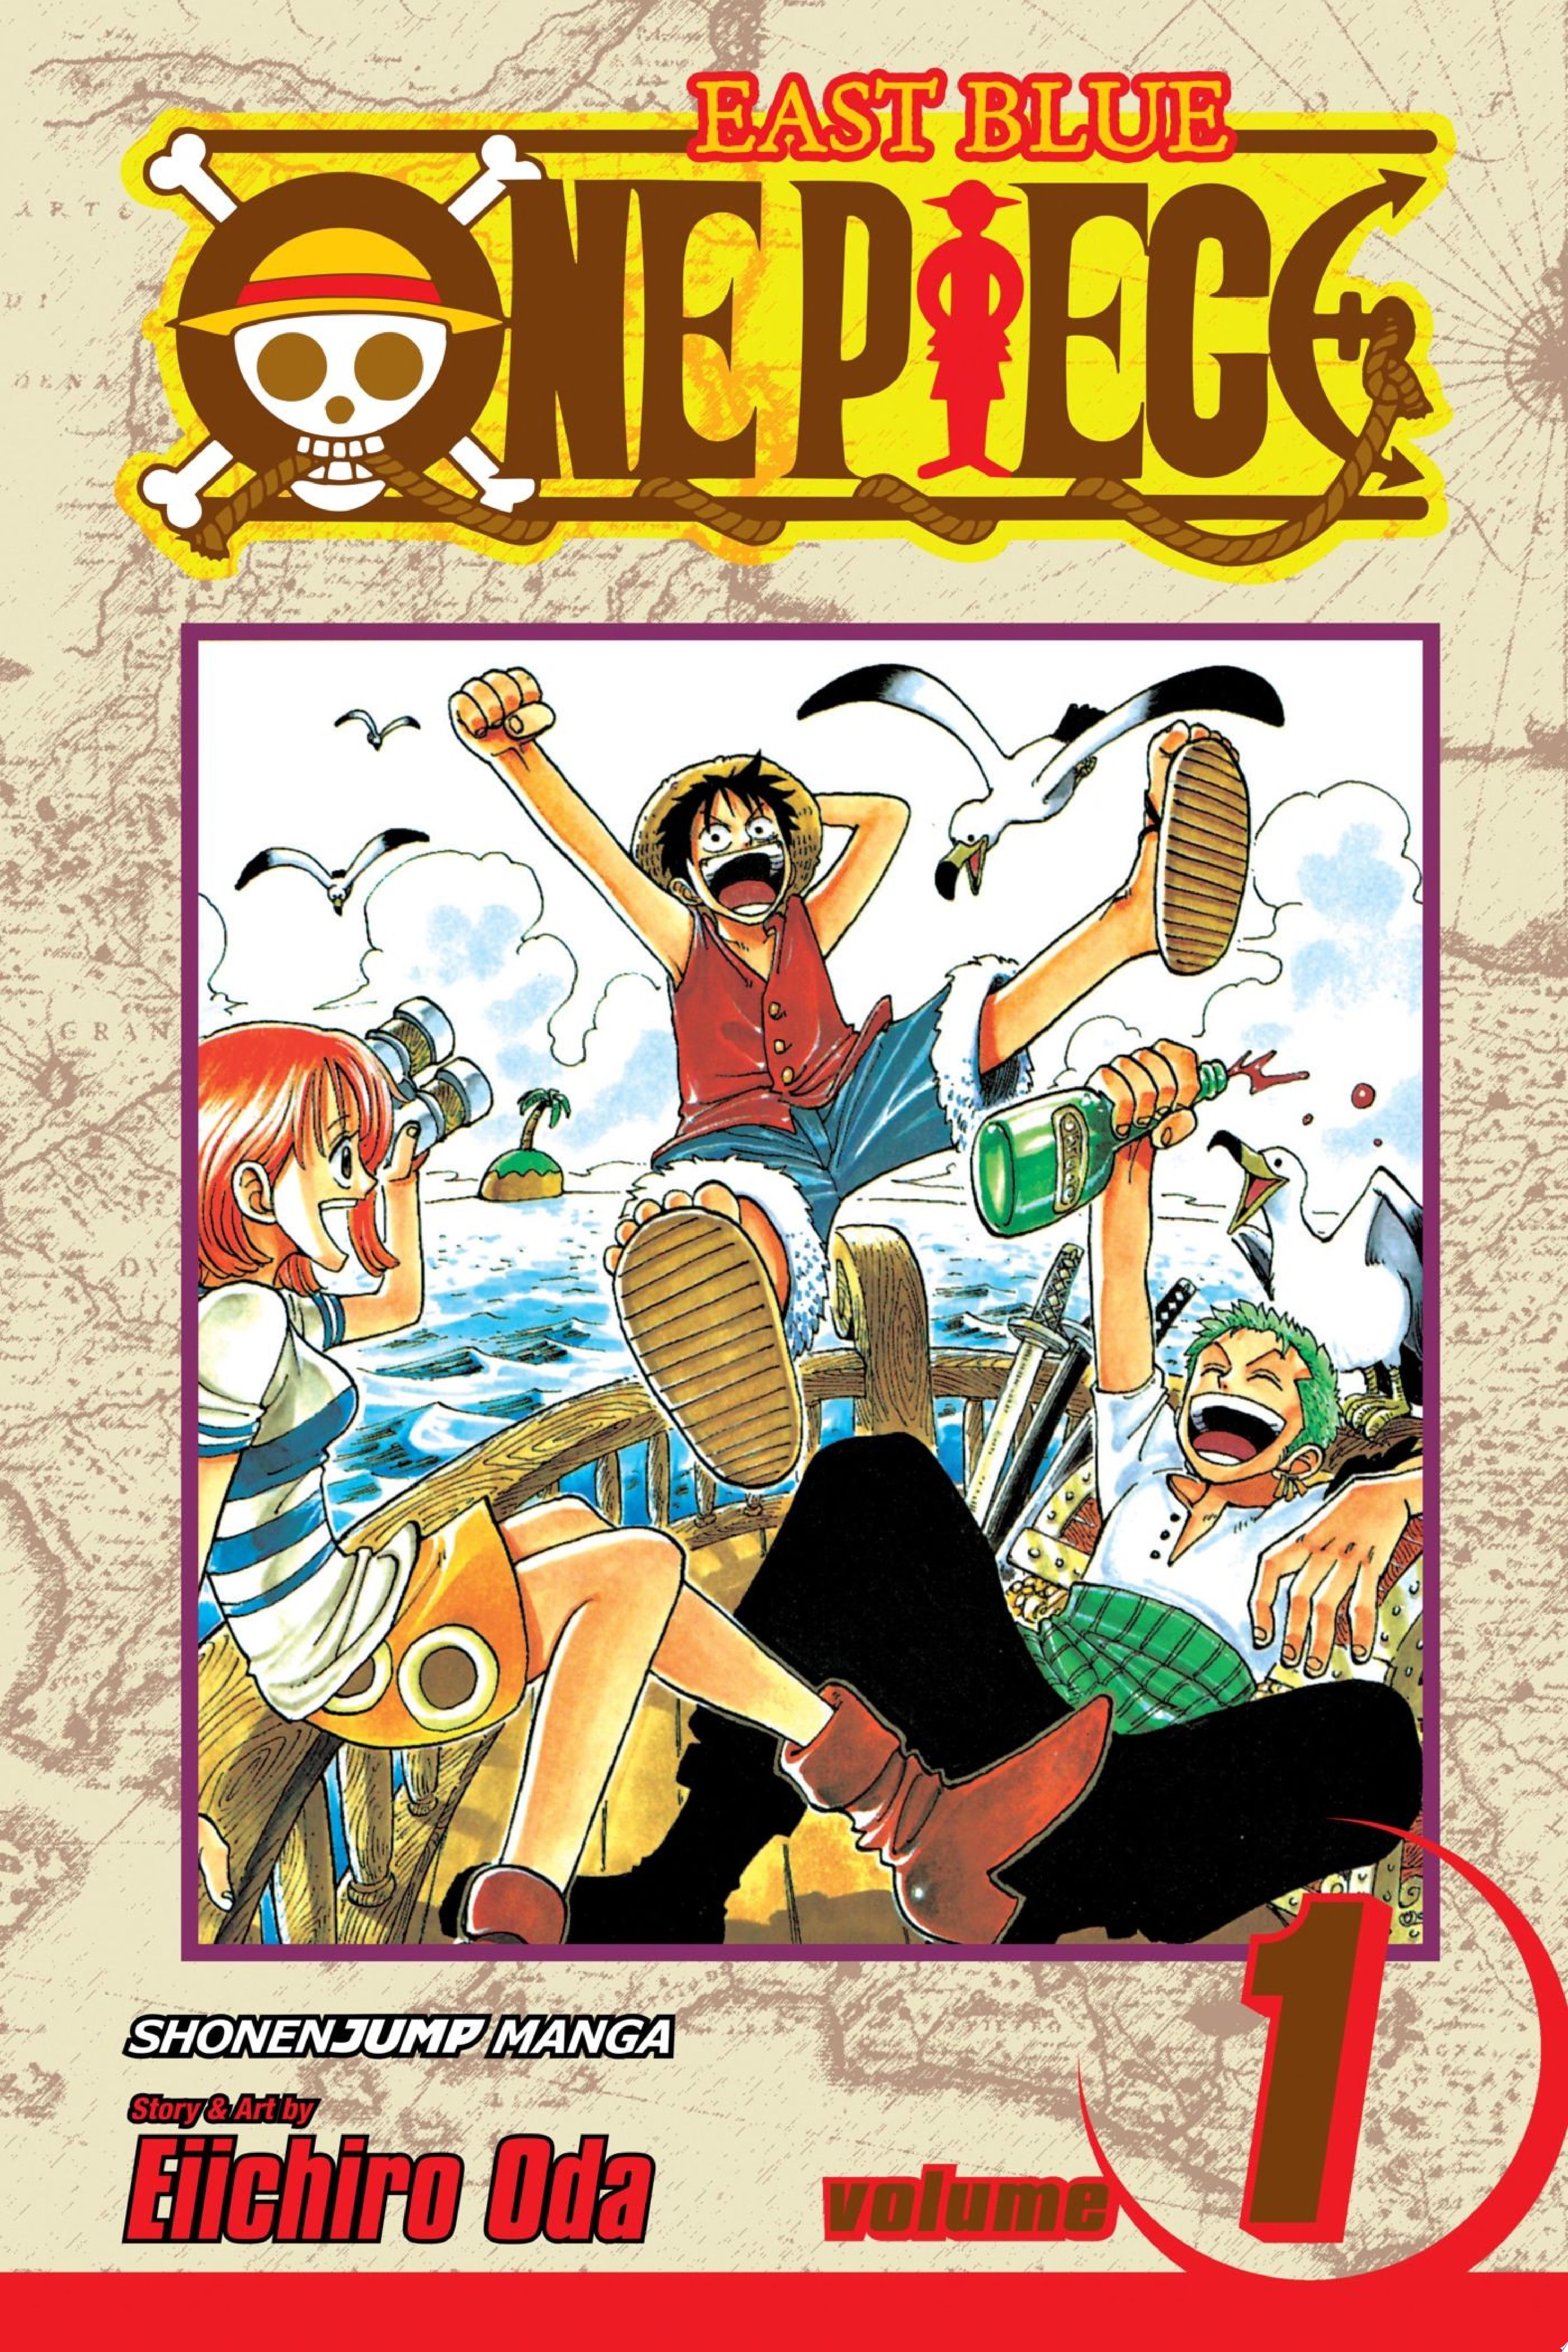 Image for "One Piece, Vol. 1"